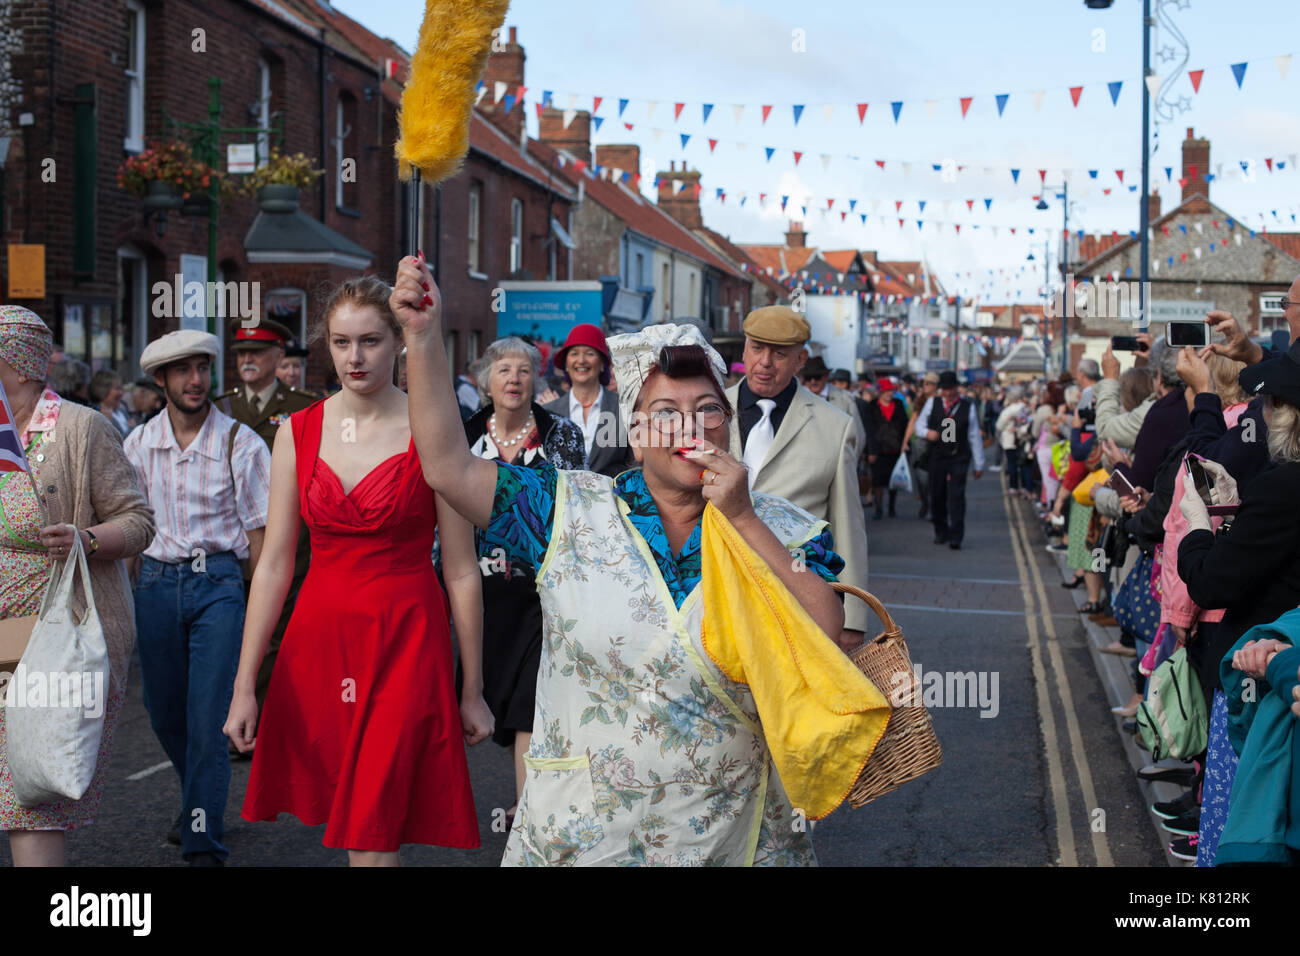 Sheringham Norfolk, UK. 17th September, 2017. Hundreds of people turn out dressed up in vintage clothing for the North Norfolk Railway 1940s weekend. The event ended with a parade through the town on Sunday afternoon. Credit: Stephanie Humphries/Alamy Live News Stock Photo